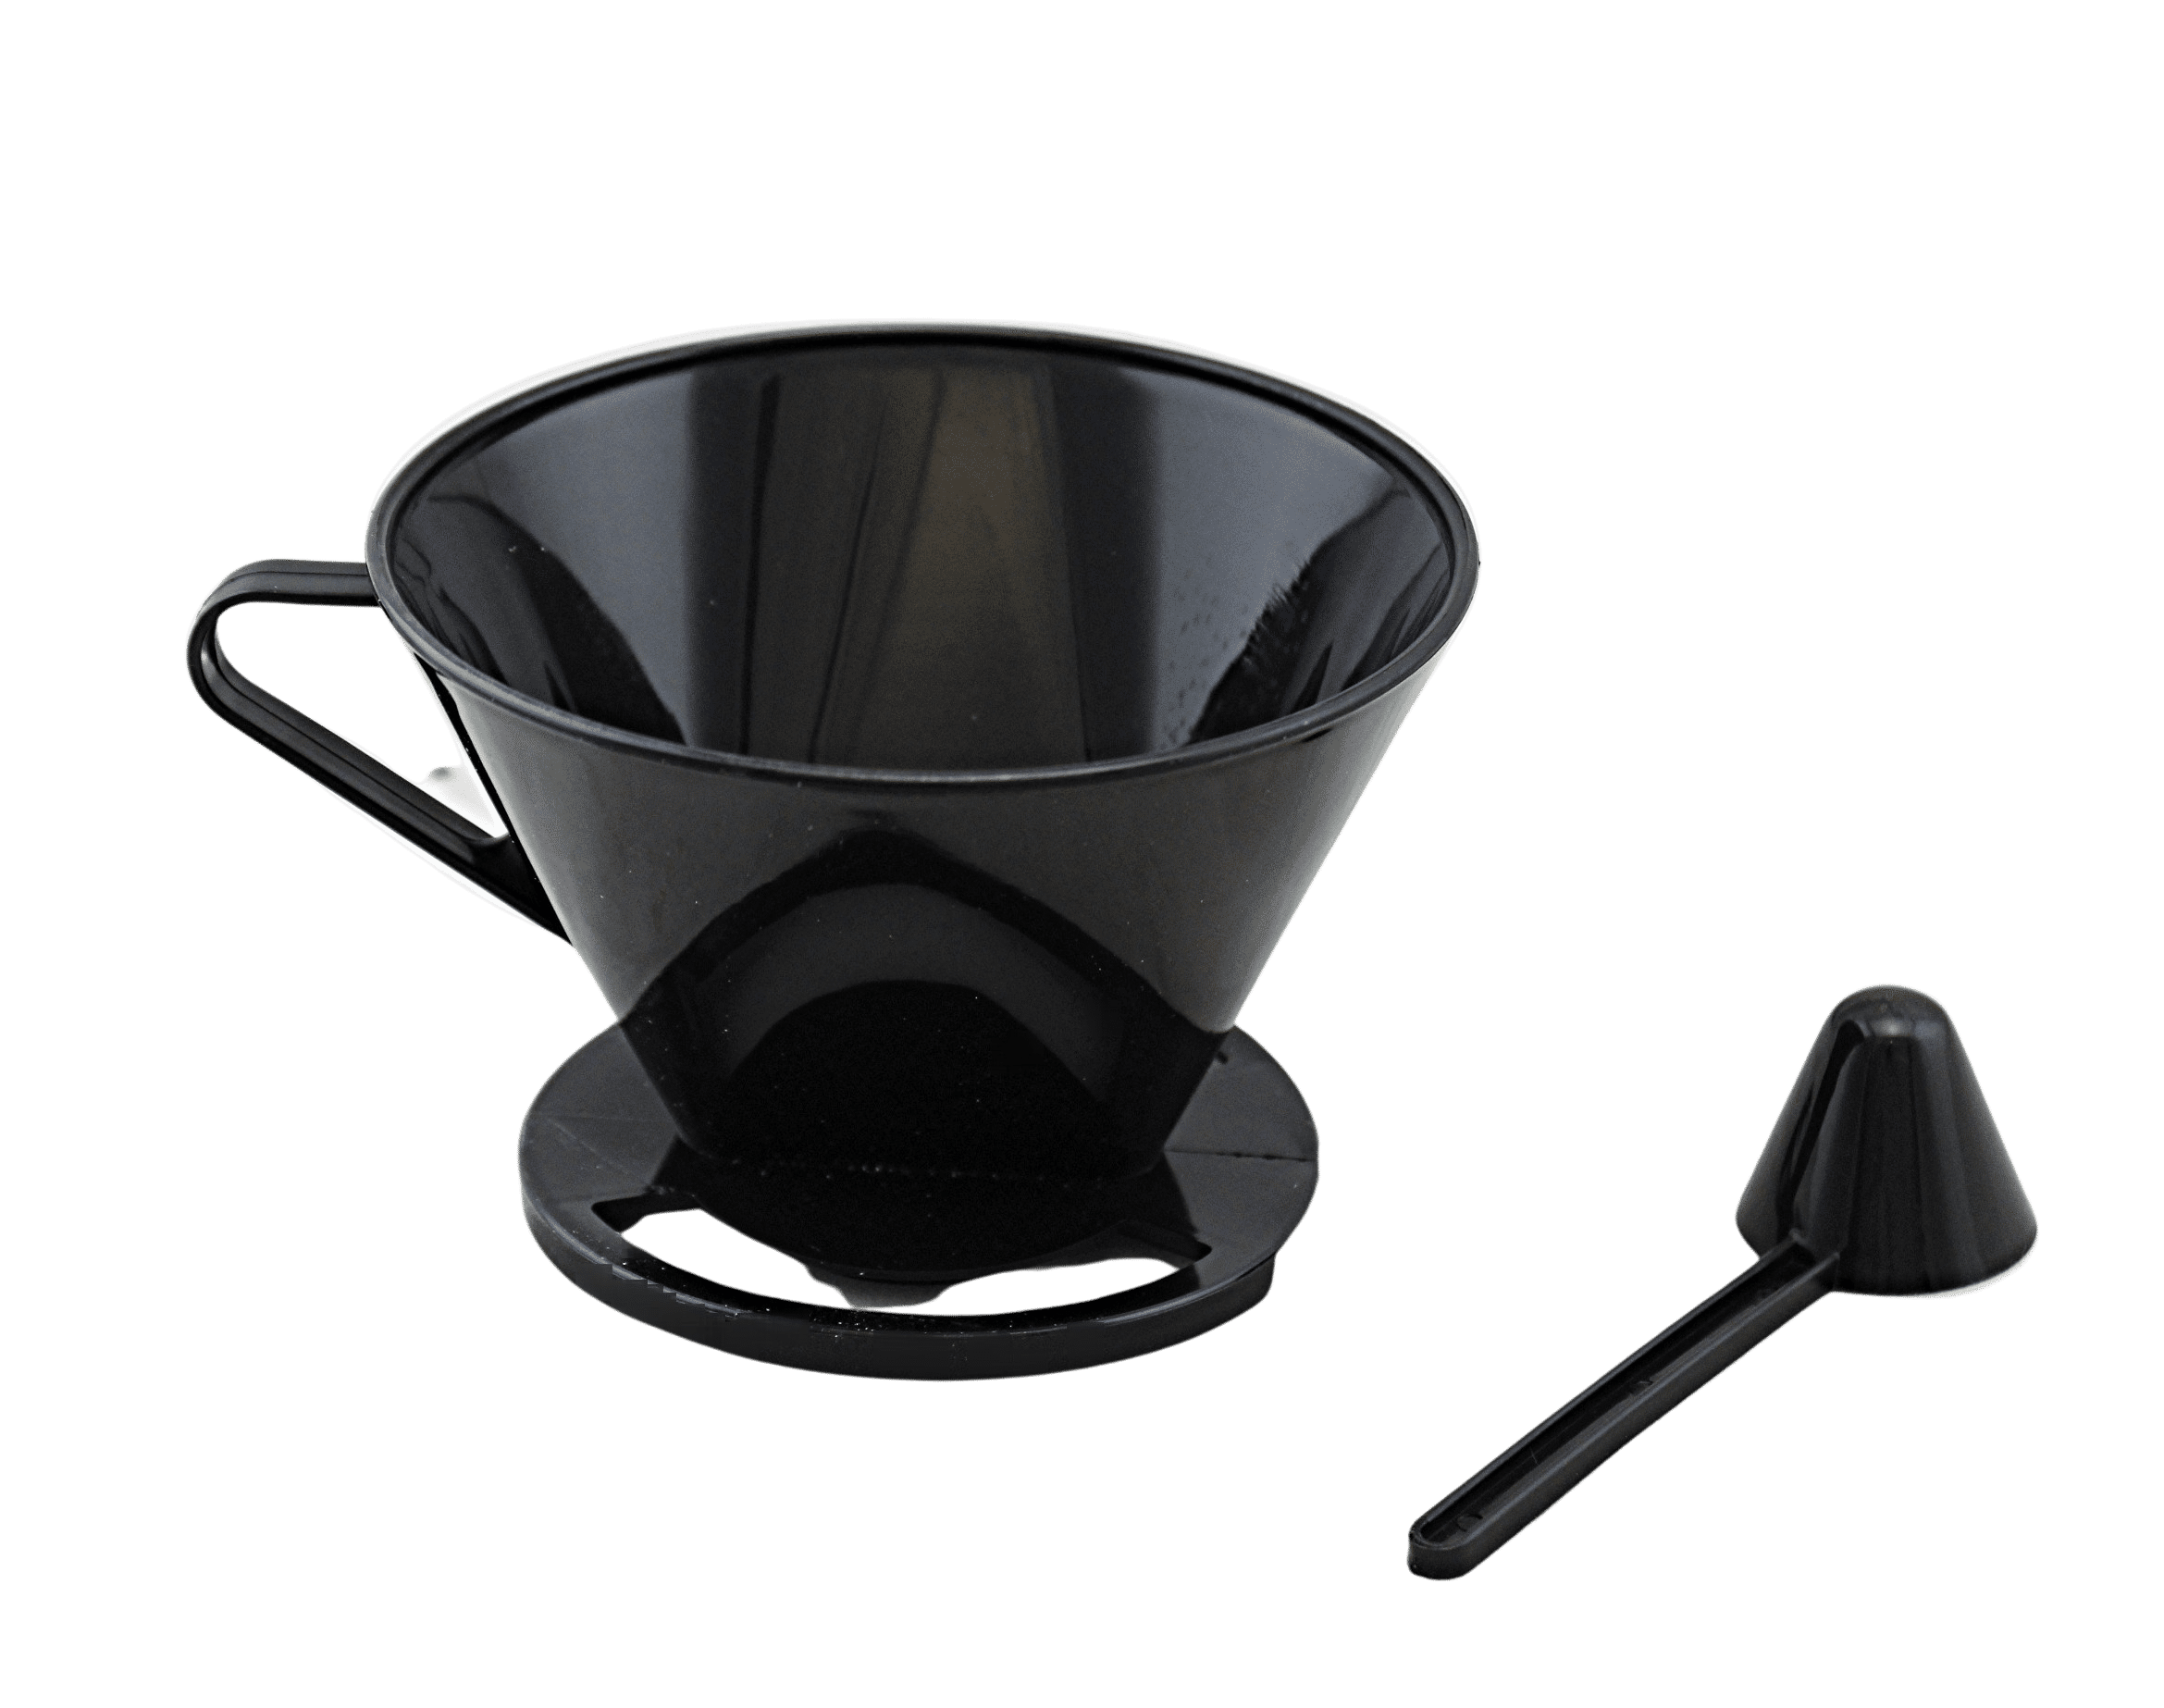  Segarty #2 Pour Over Coffee Maker, Single Cup Black Ceramic  Coffee Dripper, 1 Set Size No.2 Reusable Filter Cone Drip Holder Slow Brewer  with 3 Holes Flat Bottom for Travel, Camping